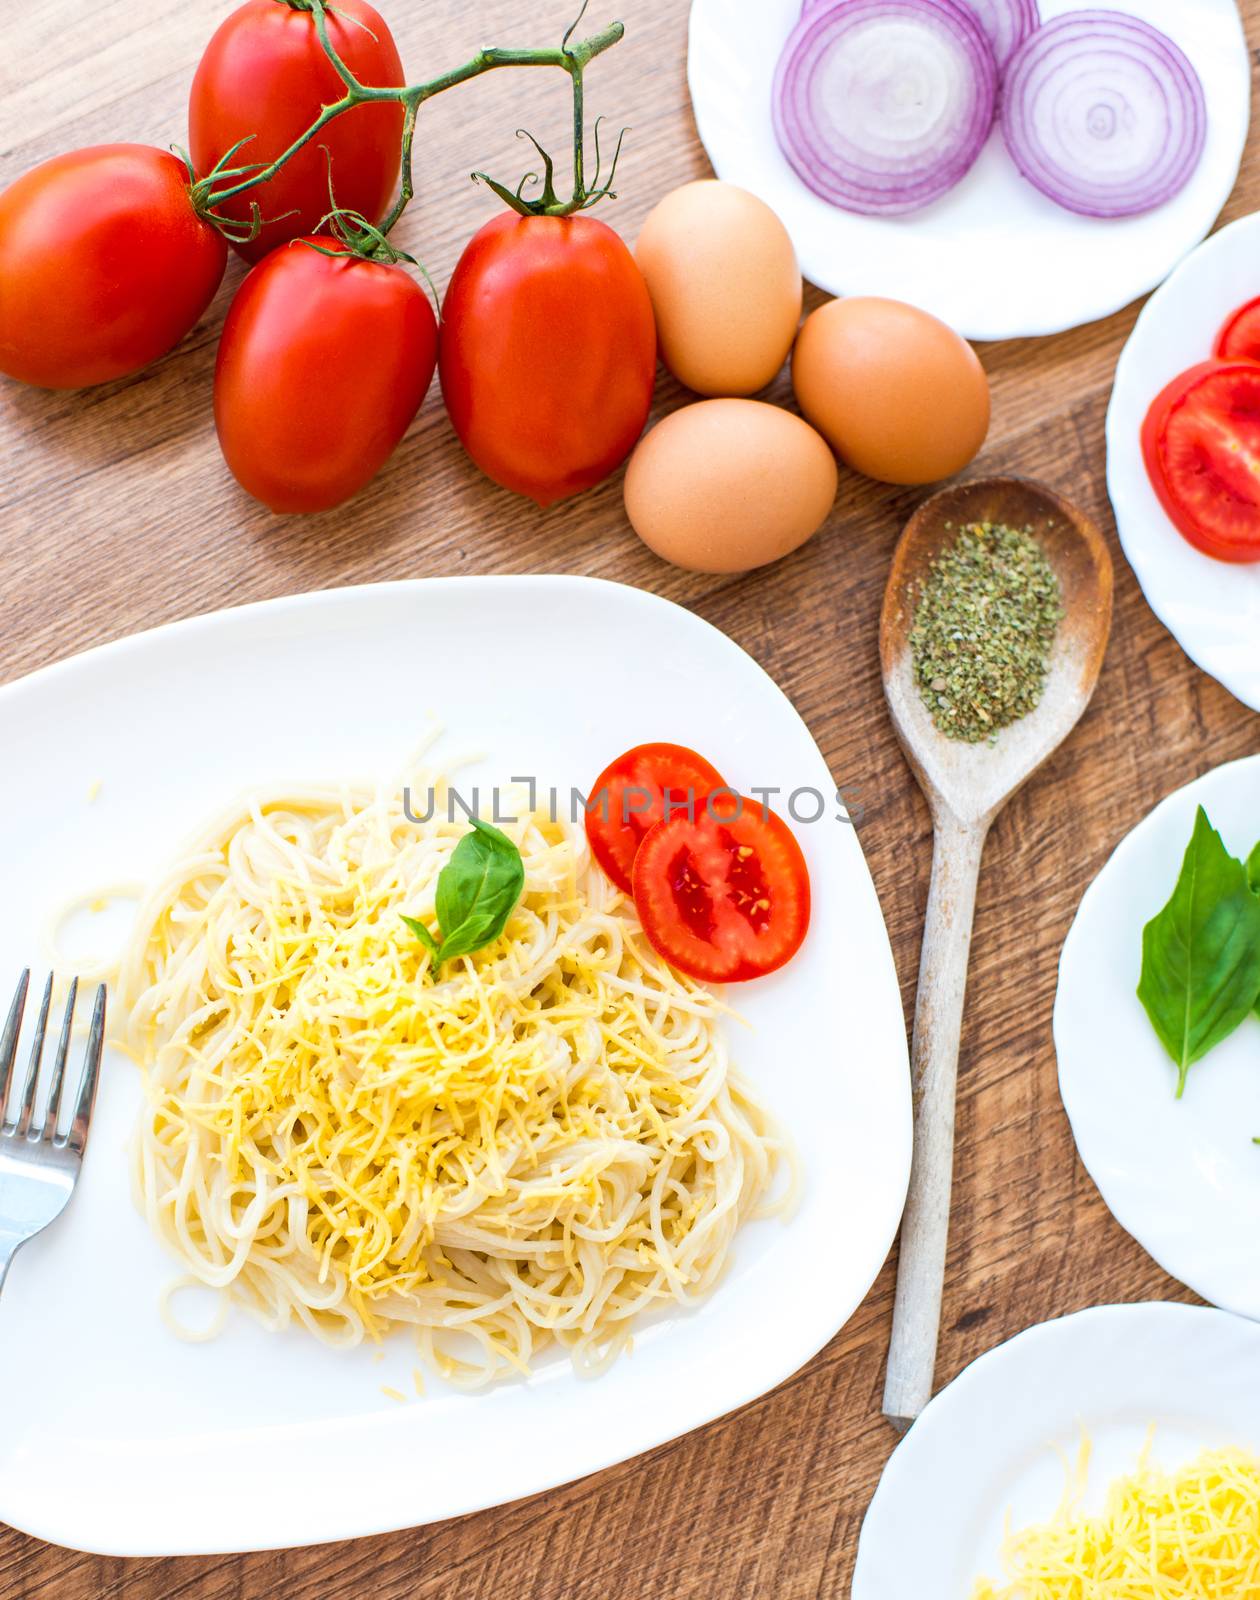 spaghetti dinner with tomatoes, cheese and basil close up